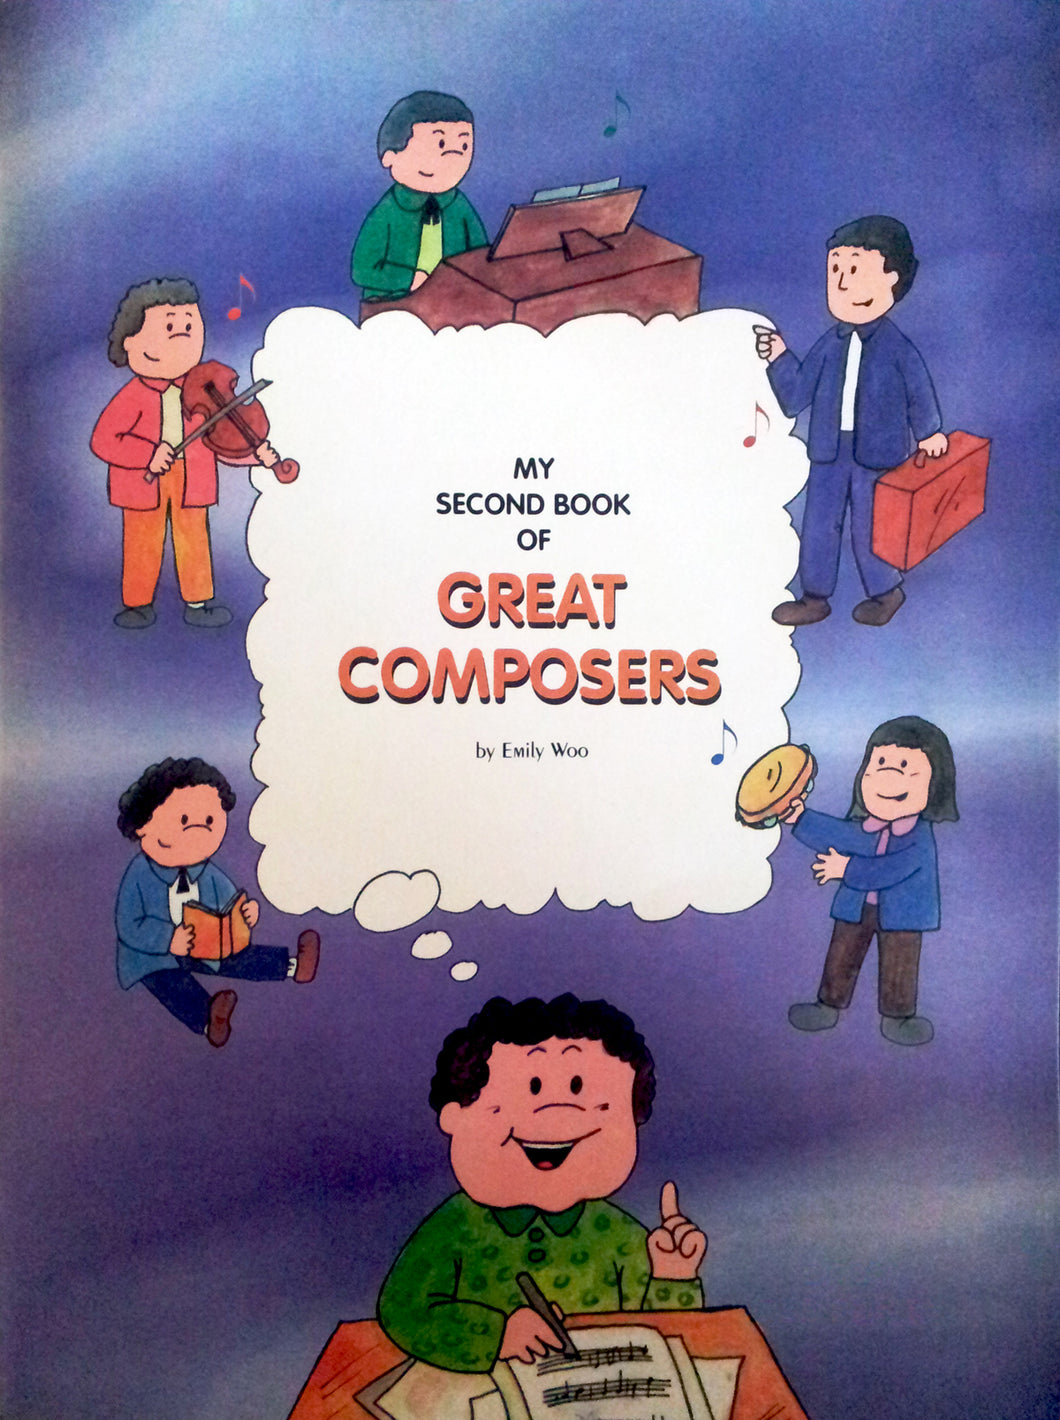 My Second Book of Great Composers